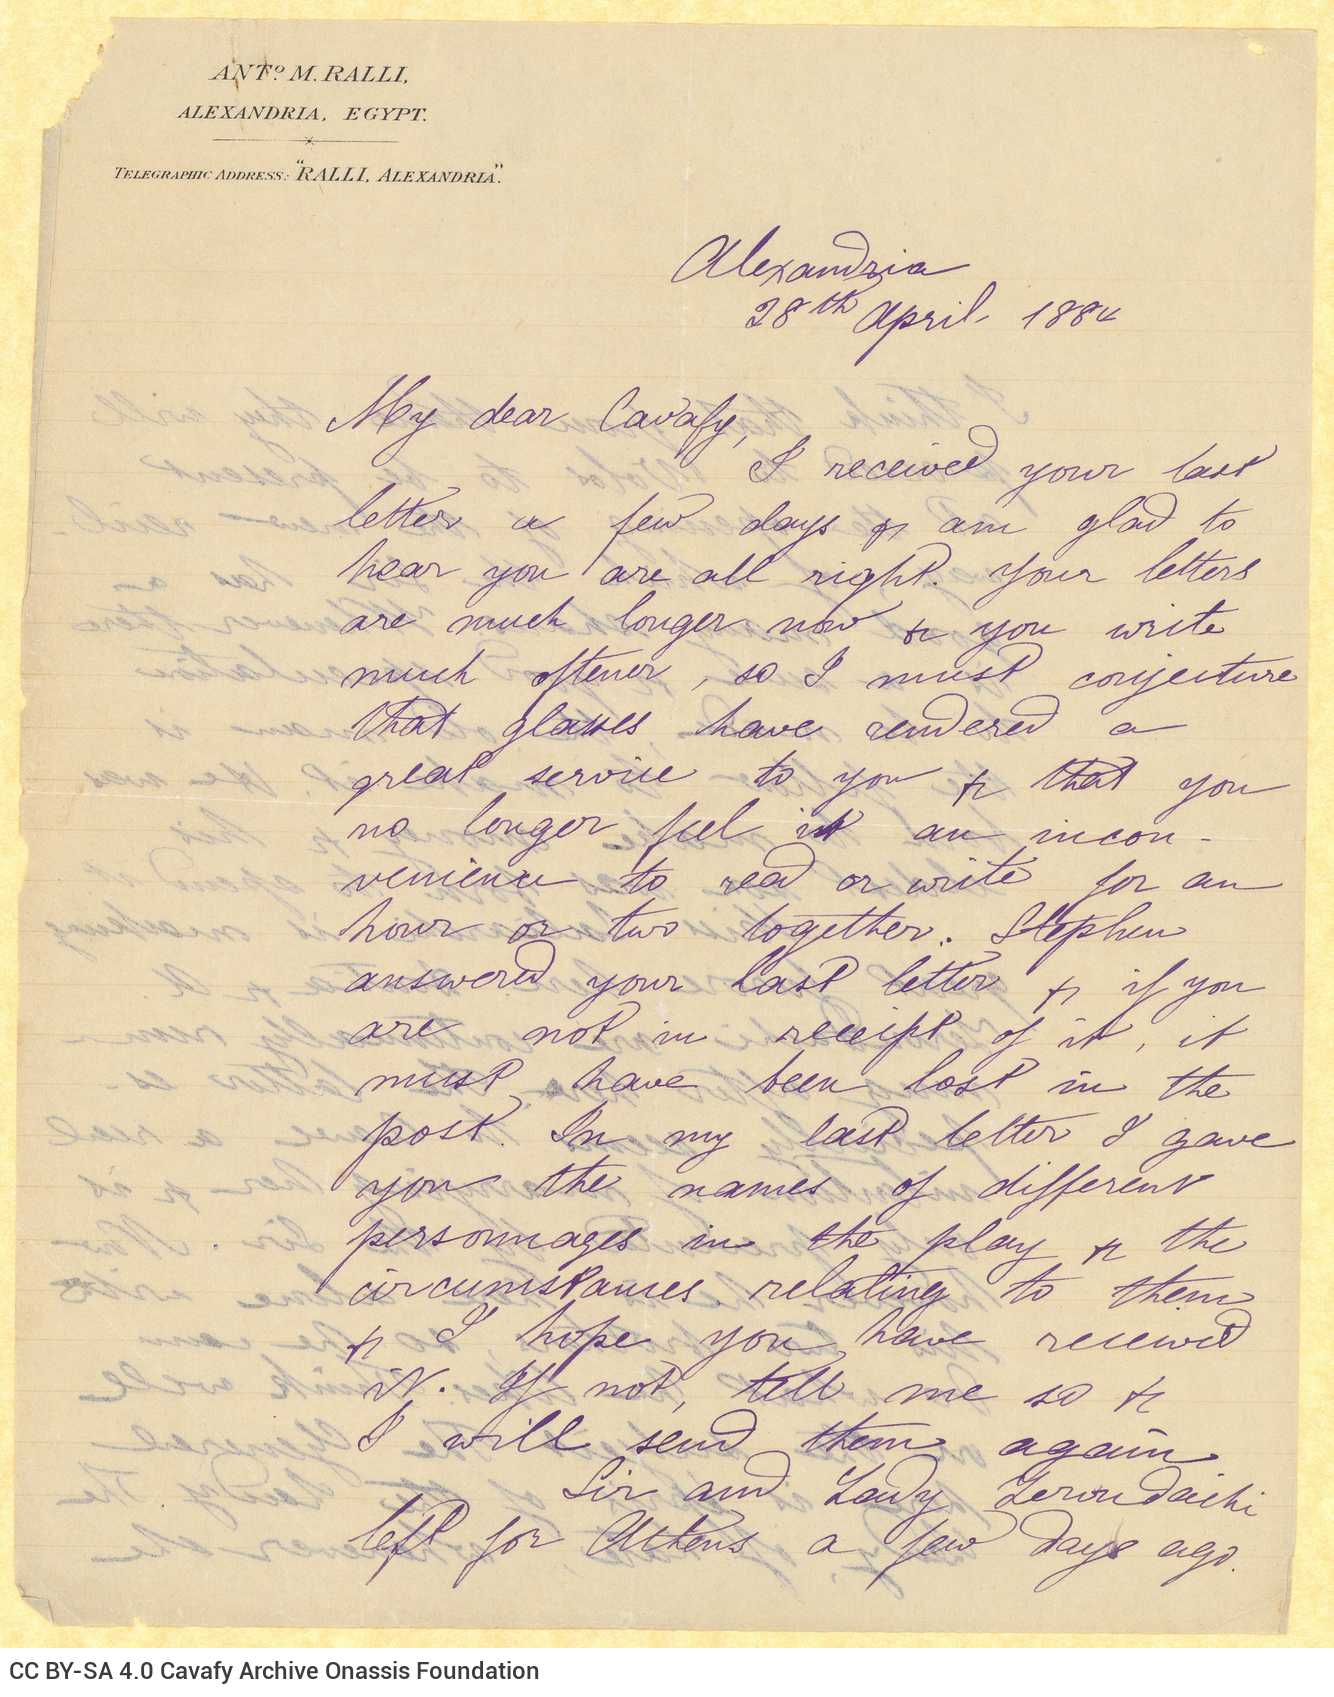 Handwritten letter by Mike Ralli to Cavafy on two sheets, with notes on all sides. Commentary on people and events related to